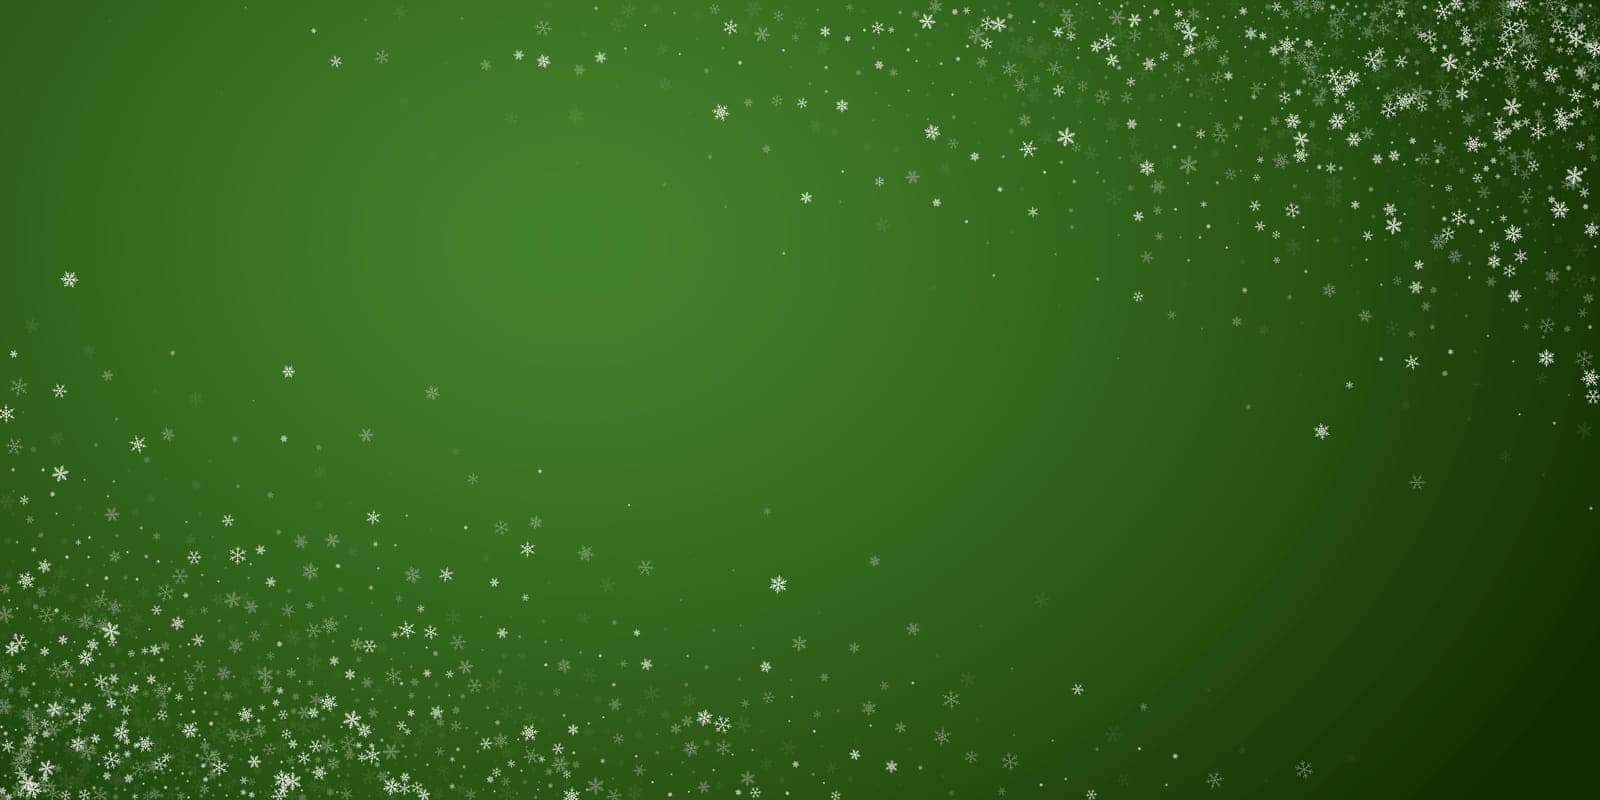 Magic falling snow christmas background. Subtle flying snow flakes and stars on christmas green background. Magic falling snow holiday scenery. Wide vector illustration.